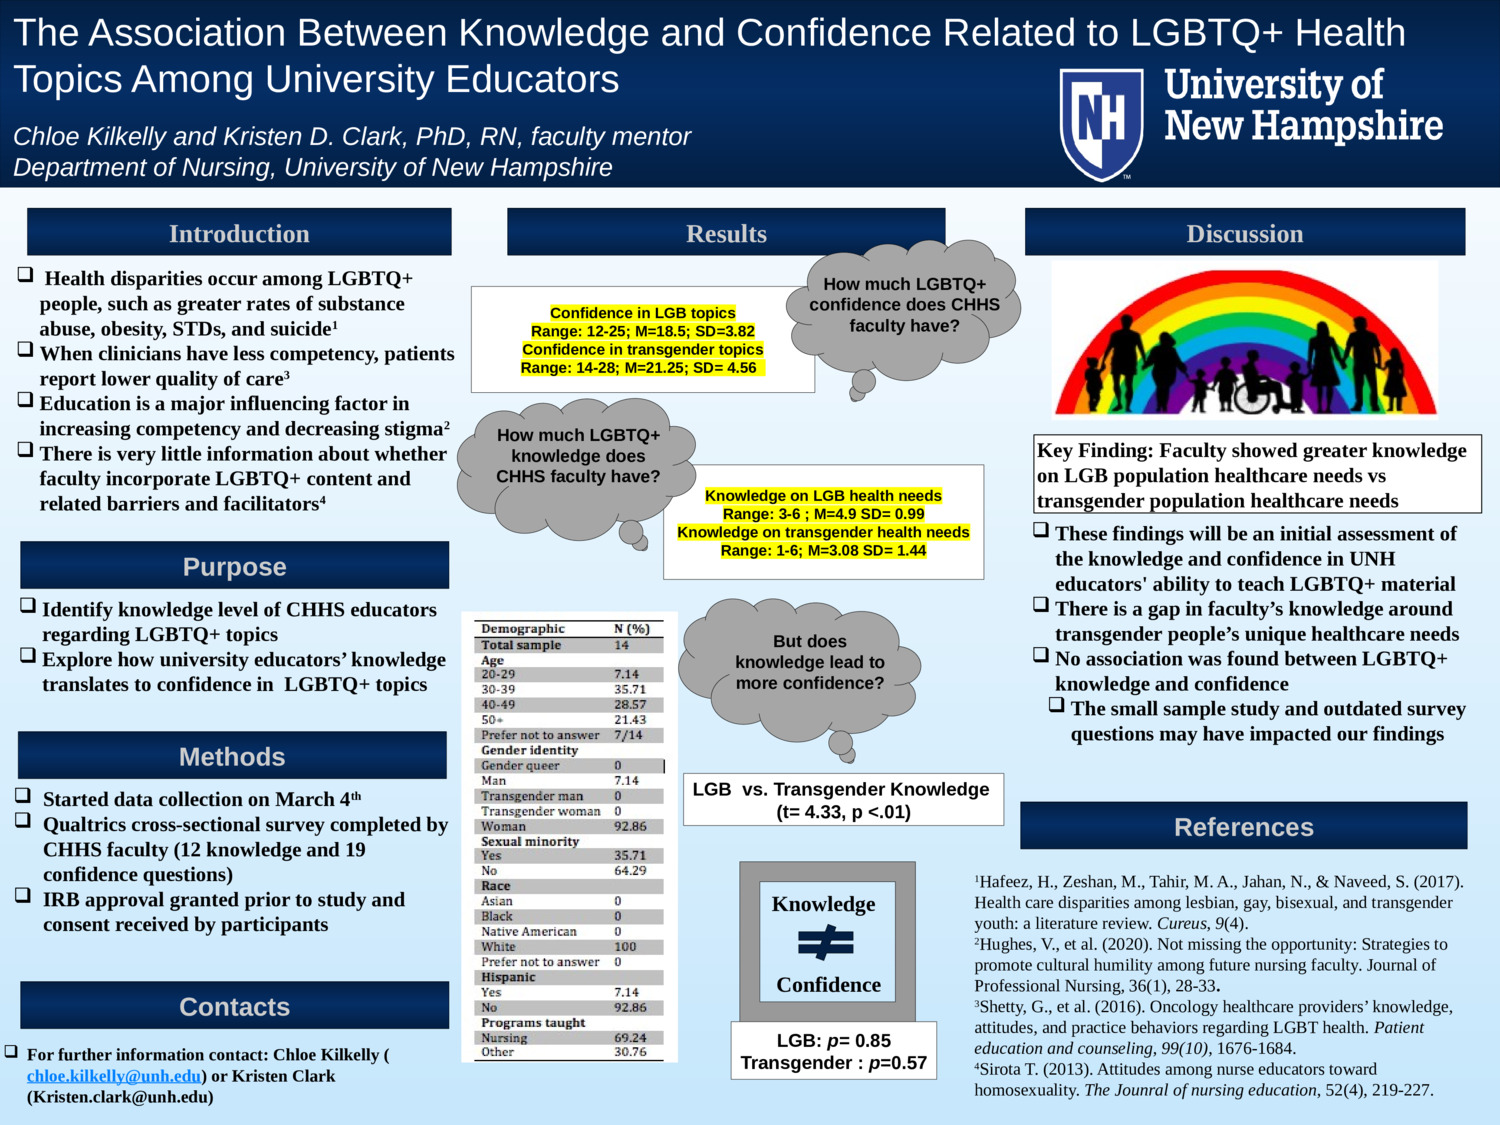 The Association Between Knowledge And Confidence Related To Lgbtq+ Health Topics Among University Educators by ctk1009